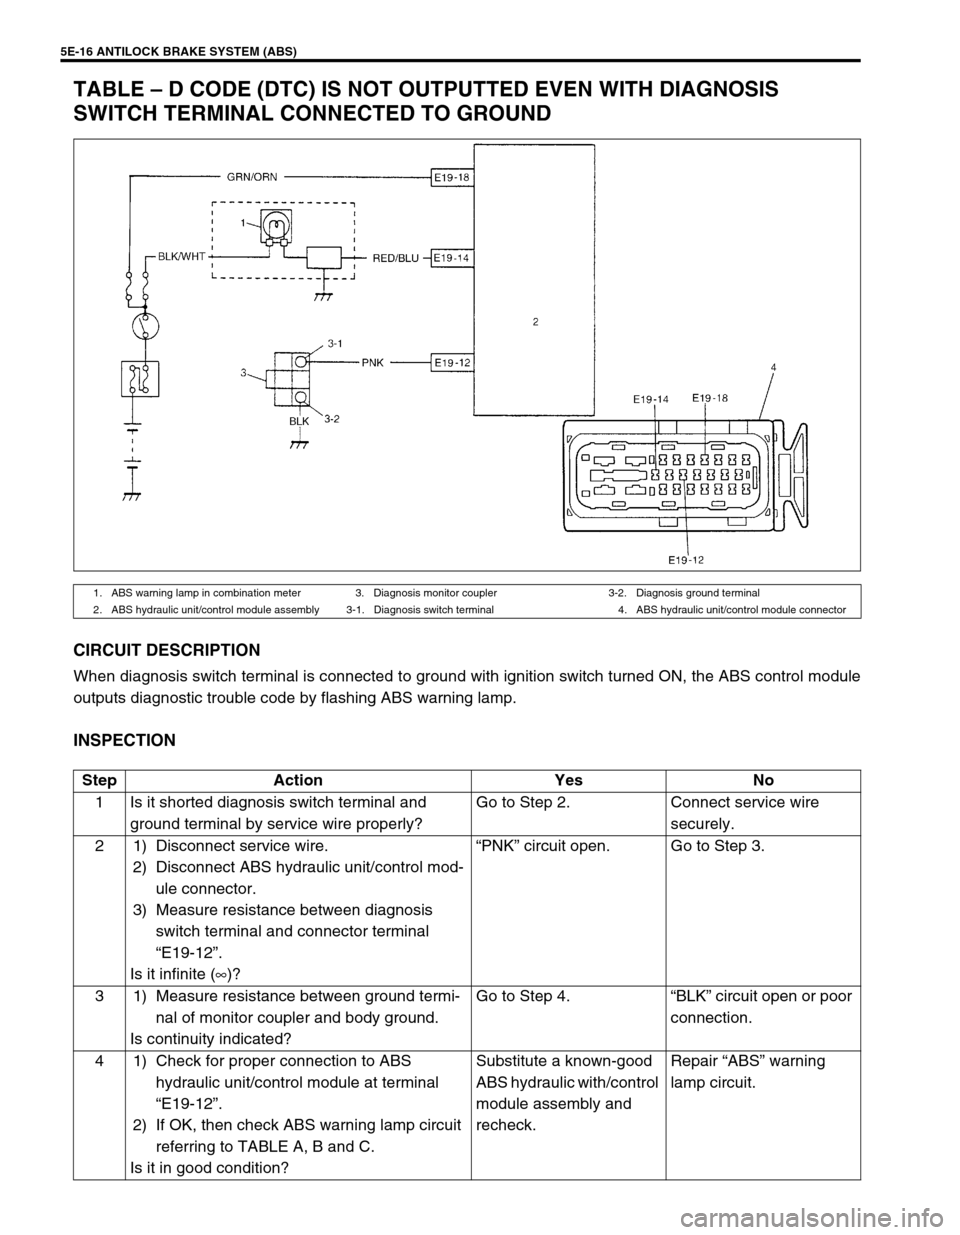 SUZUKI SWIFT 2000 1.G RG413 Service Owners Guide 5E-16 ANTILOCK BRAKE SYSTEM (ABS)
TABLE – D CODE (DTC) IS NOT OUTPUTTED EVEN WITH DIAGNOSIS 
SWITCH TERMINAL CONNECTED TO GROUND
CIRCUIT DESCRIPTION
When diagnosis switch terminal is connected to gr